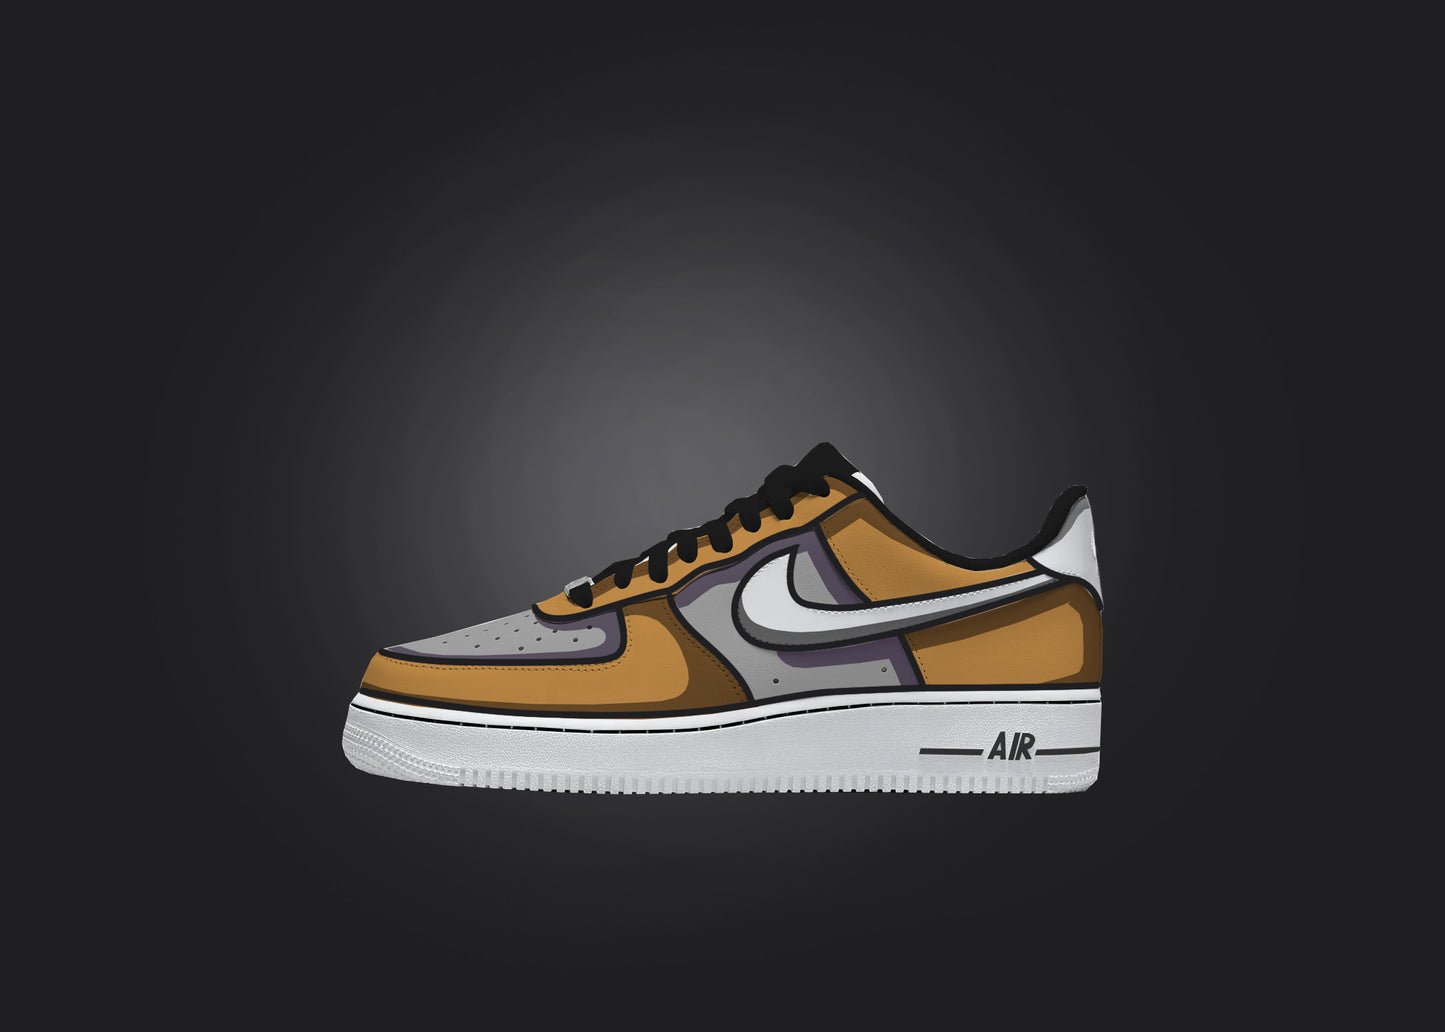 Single orange and gray Cartoon Shade Custom Air Force 1 displayed on a black background, spotlighting the hand-painted cartoon shading details.